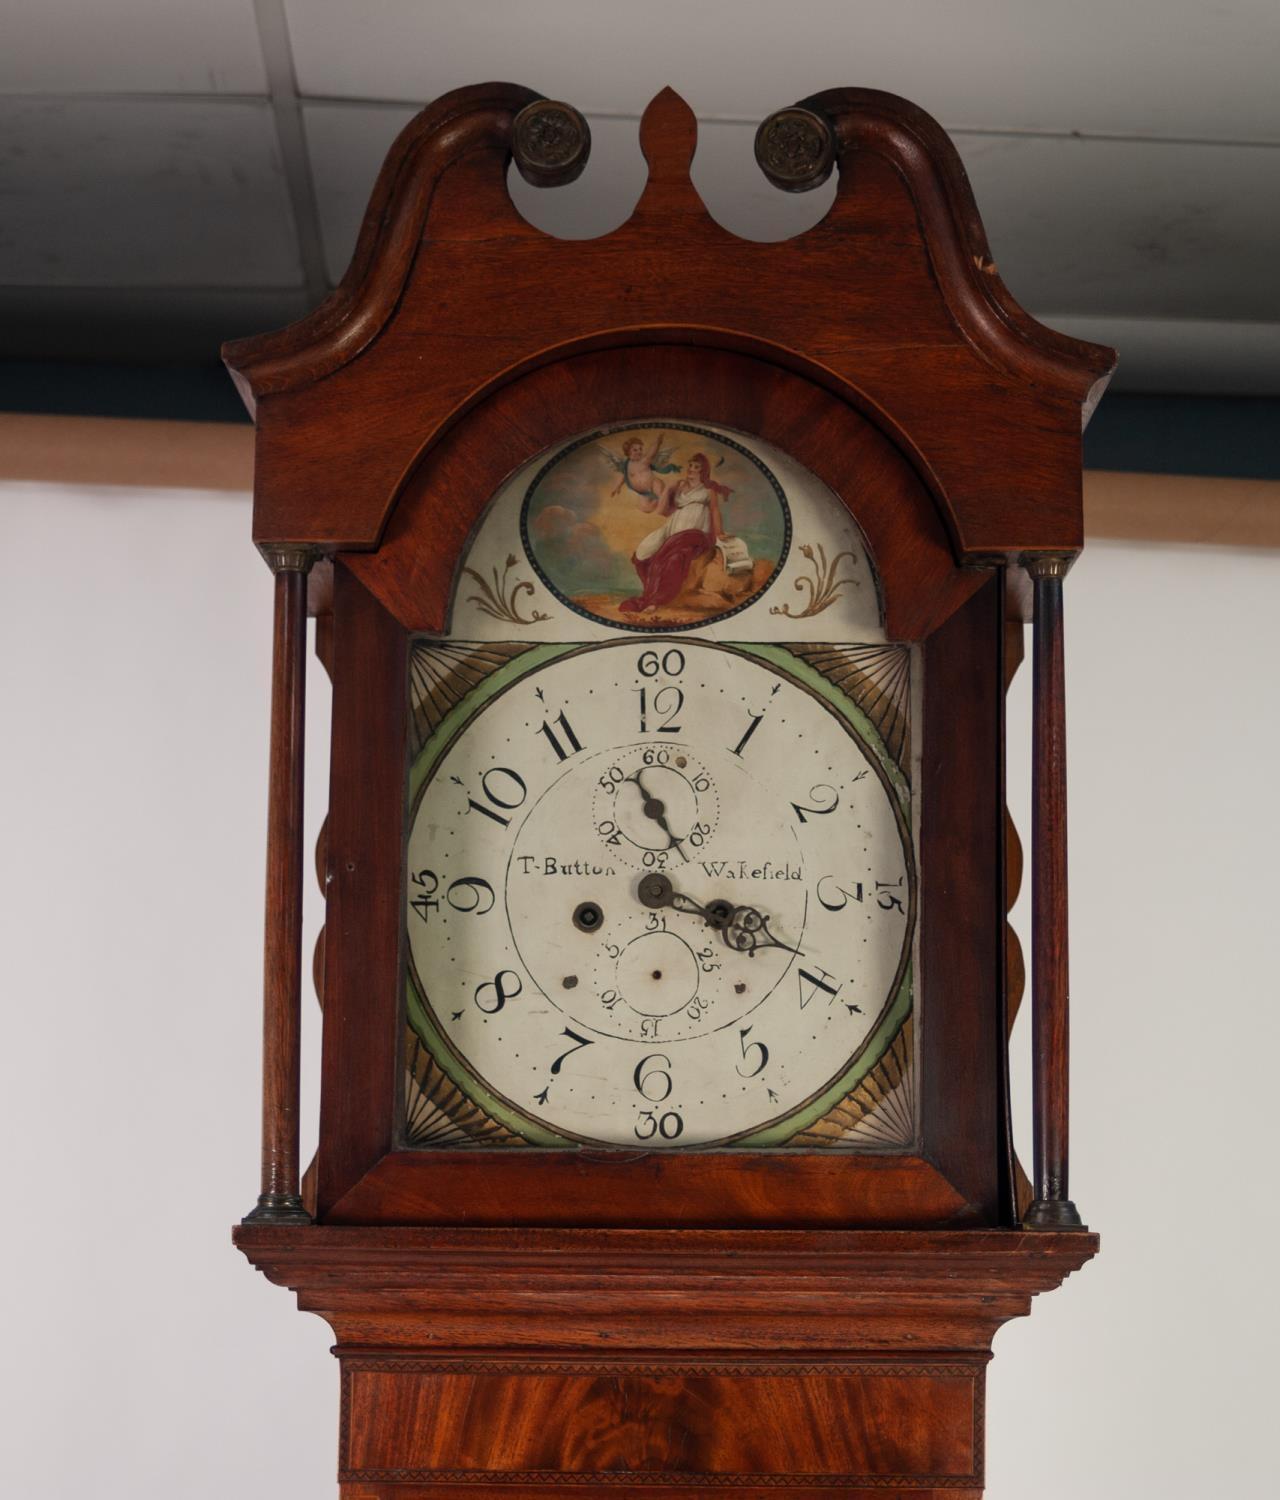 GEORGE III INLAID OAK AND MAHOGANY LONGCASE CLOCK SIGNED T.BUTTON, WAKEFIELD, the re-painted 13? - Image 2 of 2